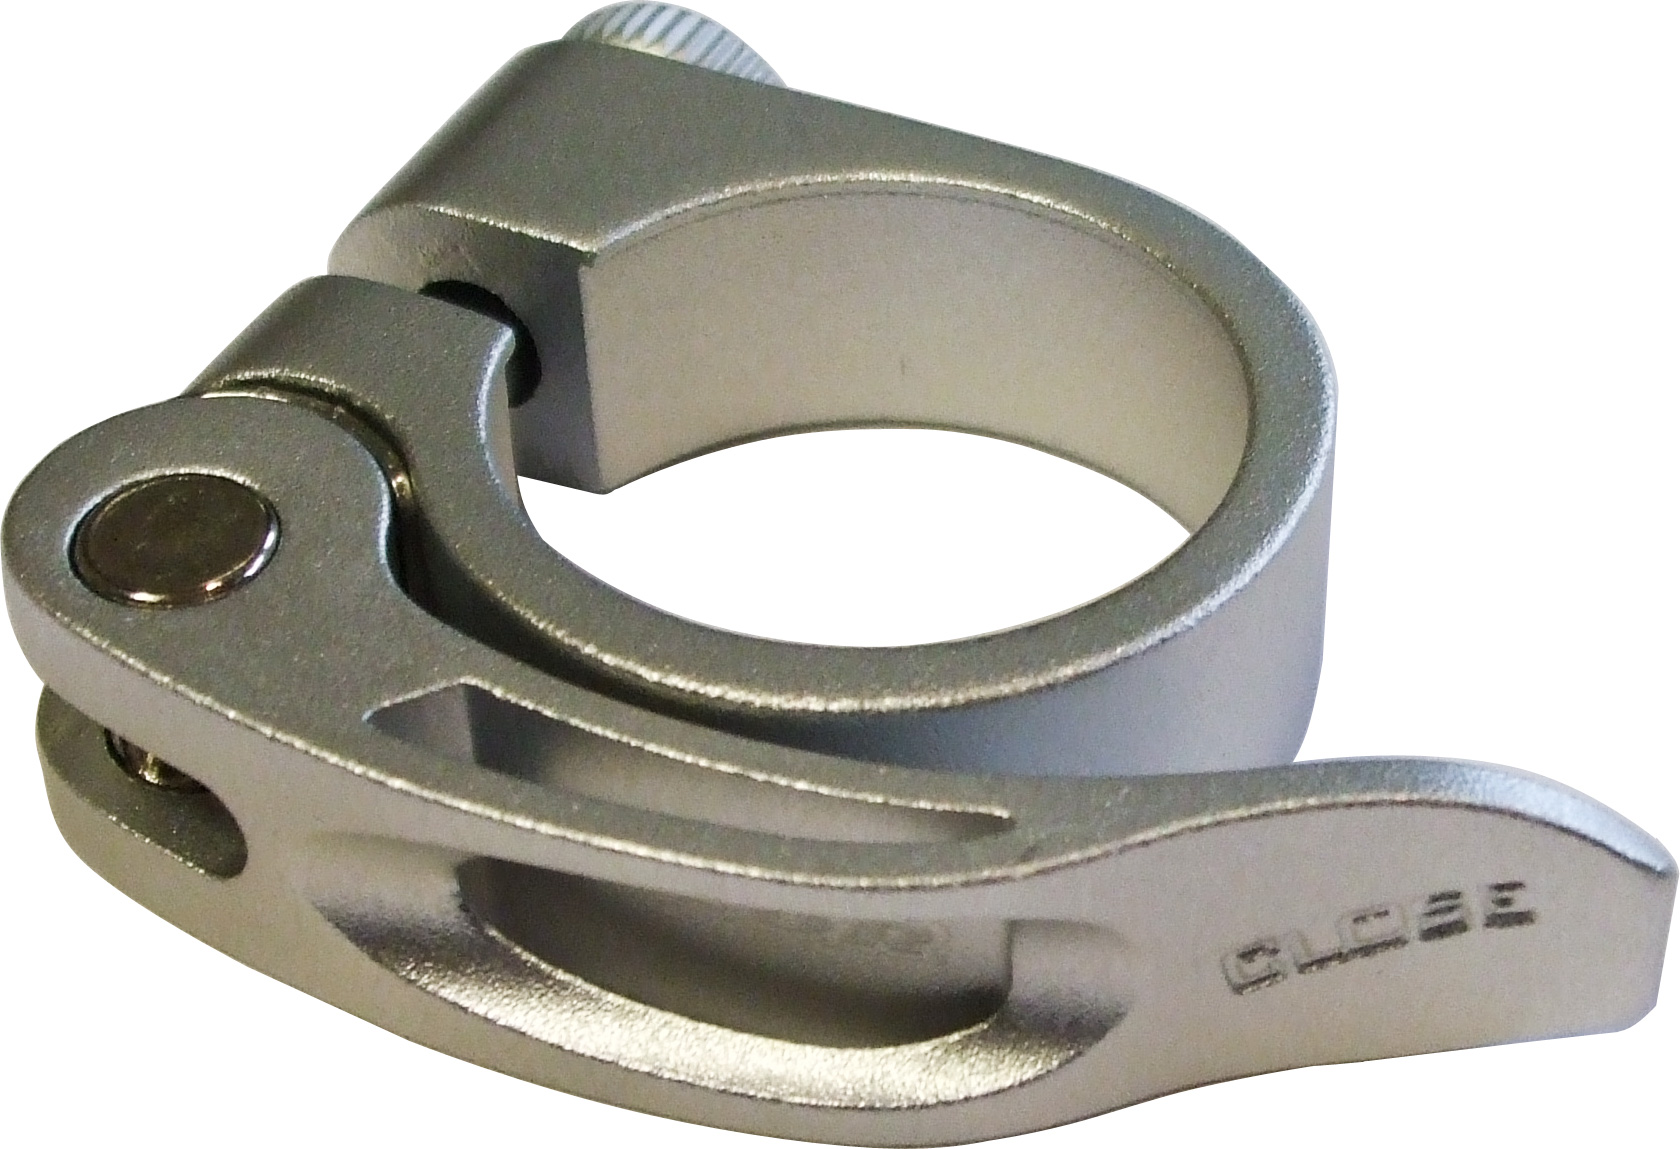 AQR26038S Acor Silver 31.8mm Alloy Q/R Seat Post Clamp